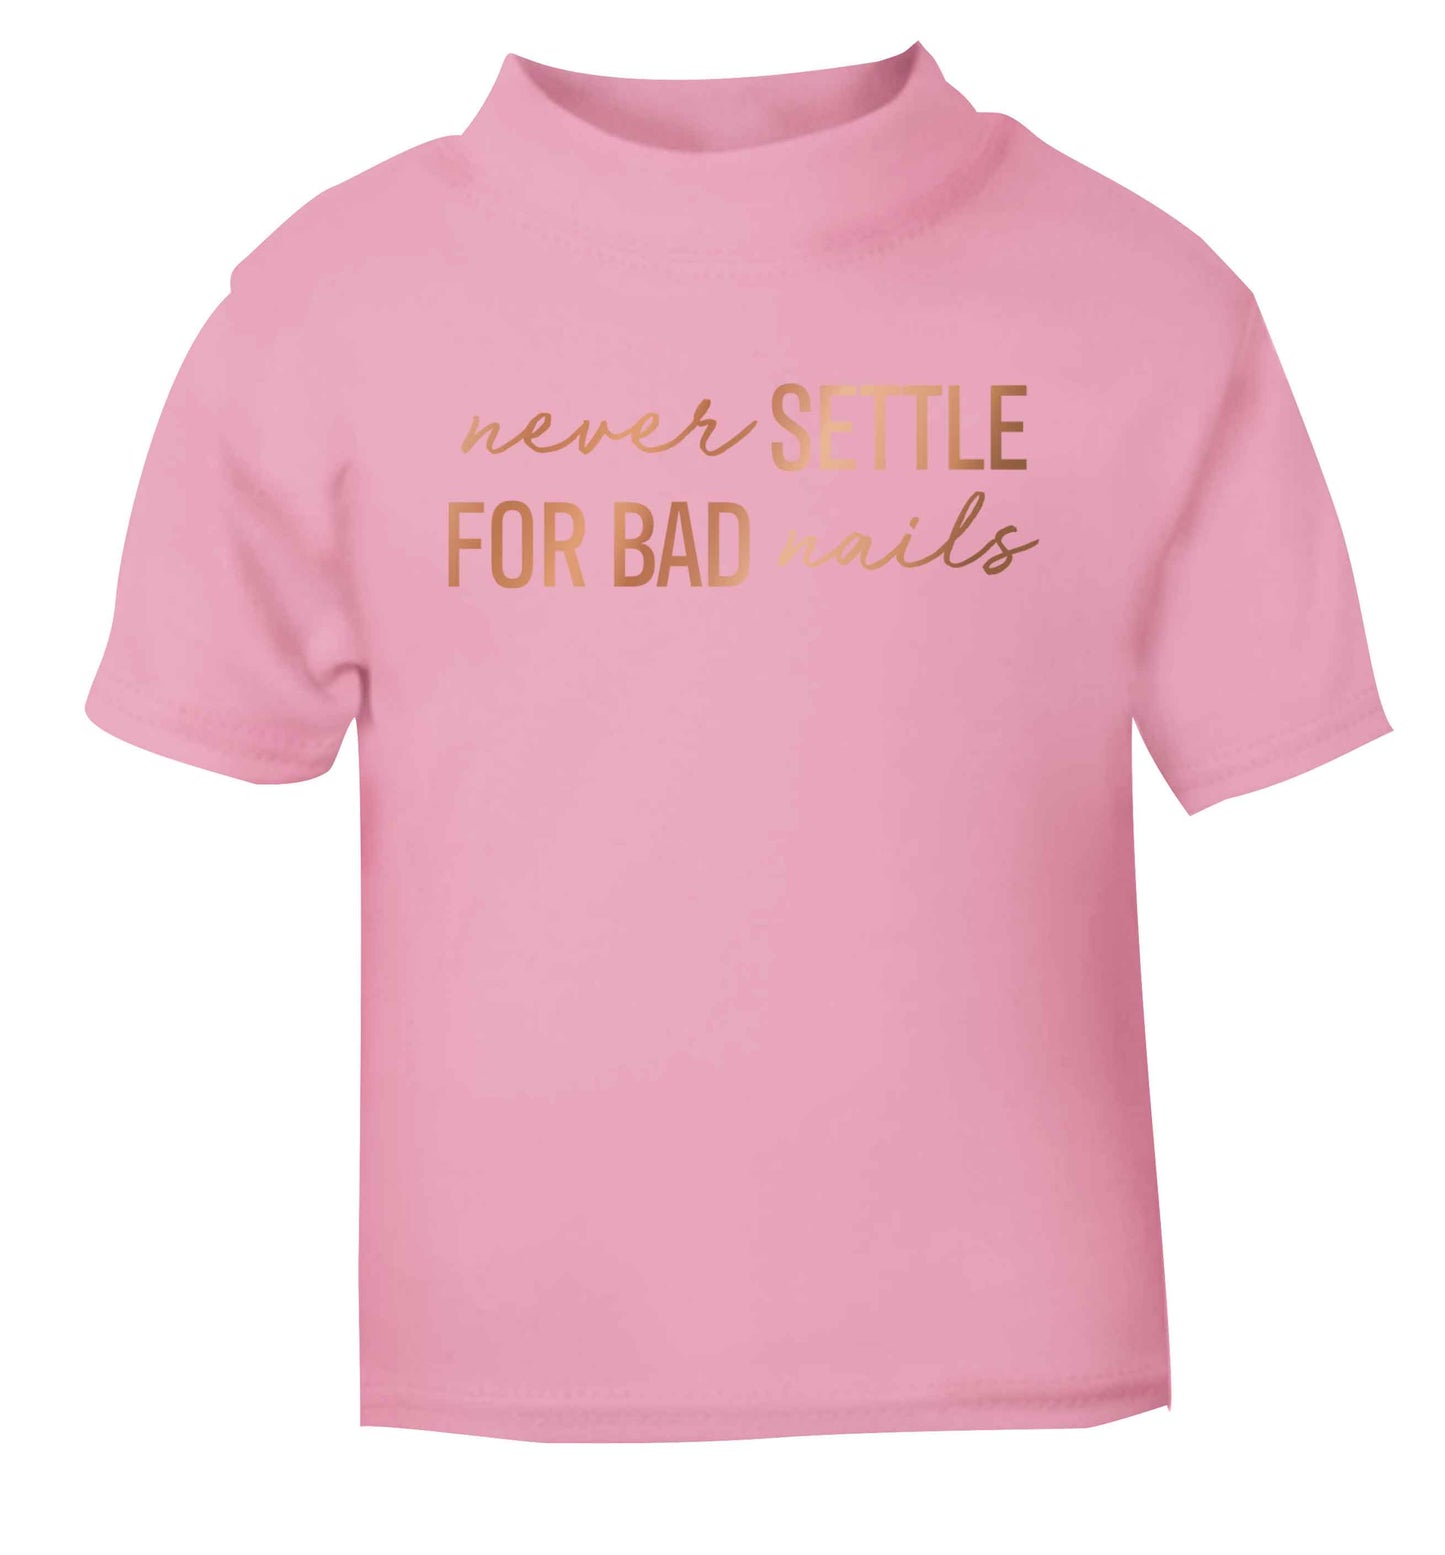 Never settle for bad nails - rose gold light pink baby toddler Tshirt 2 Years